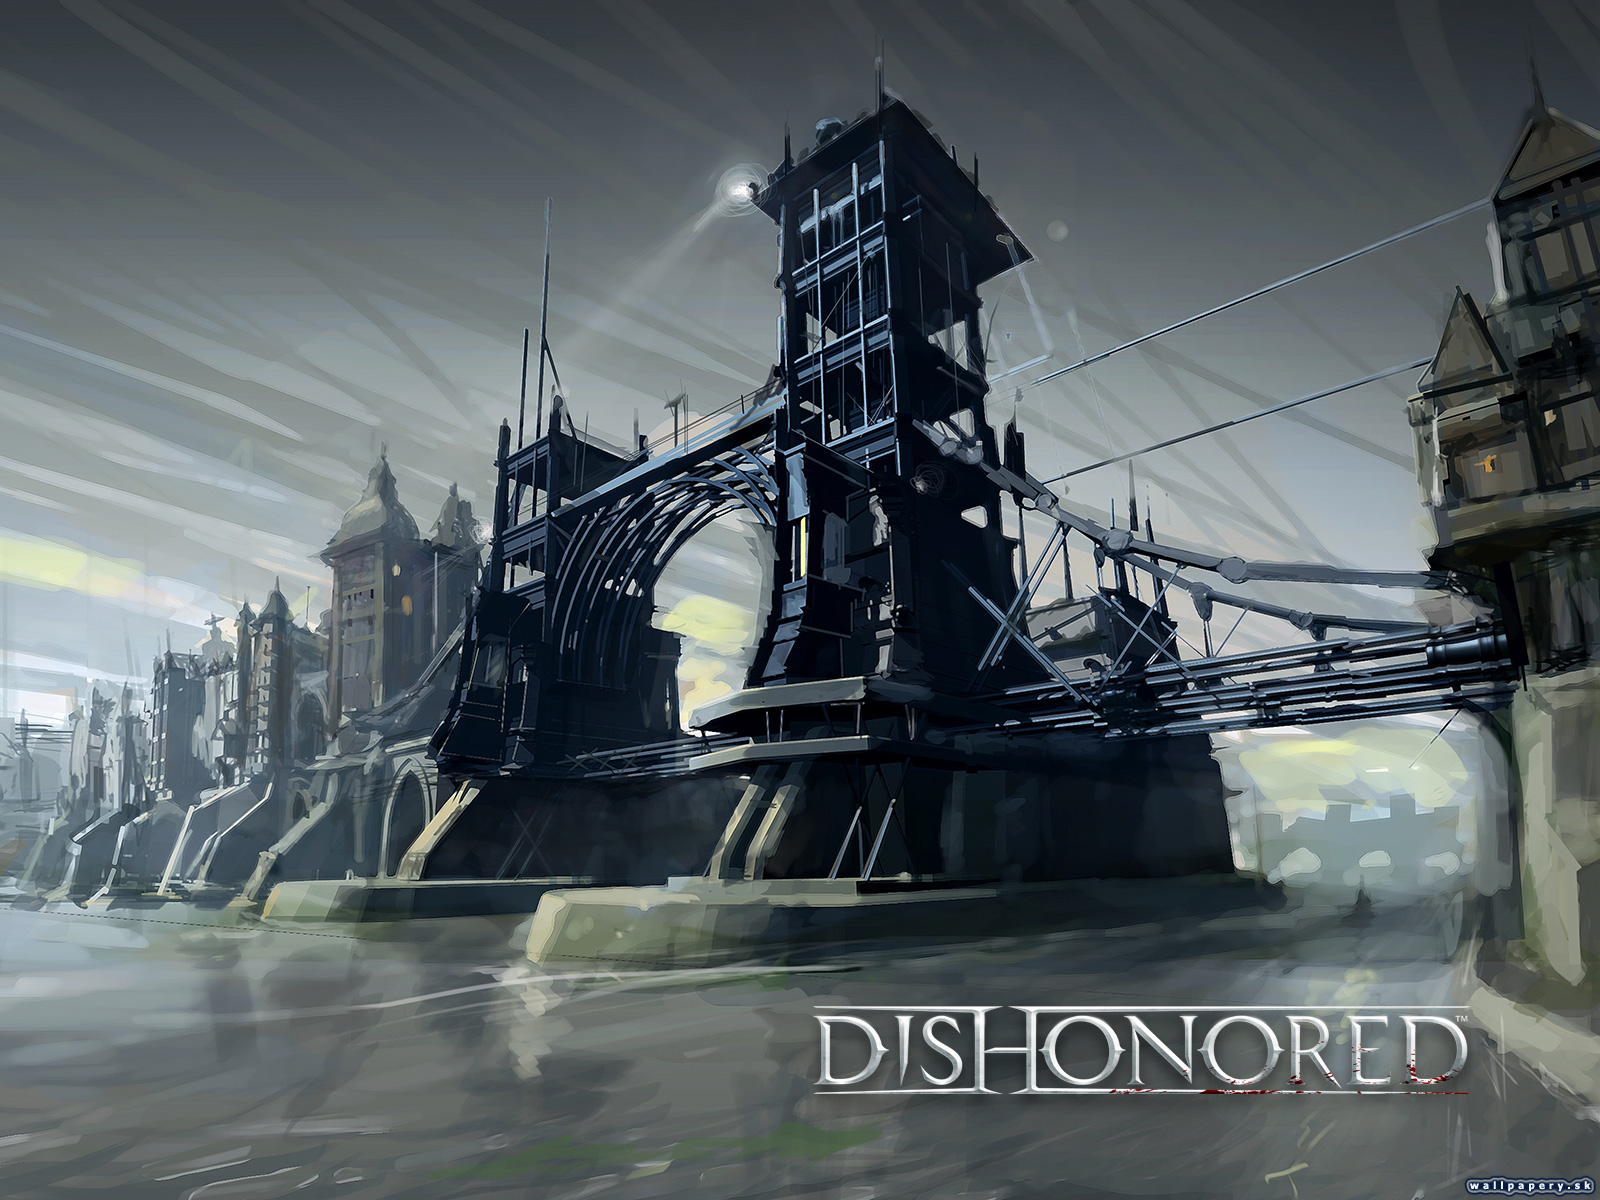 Dishonored - wallpaper 8